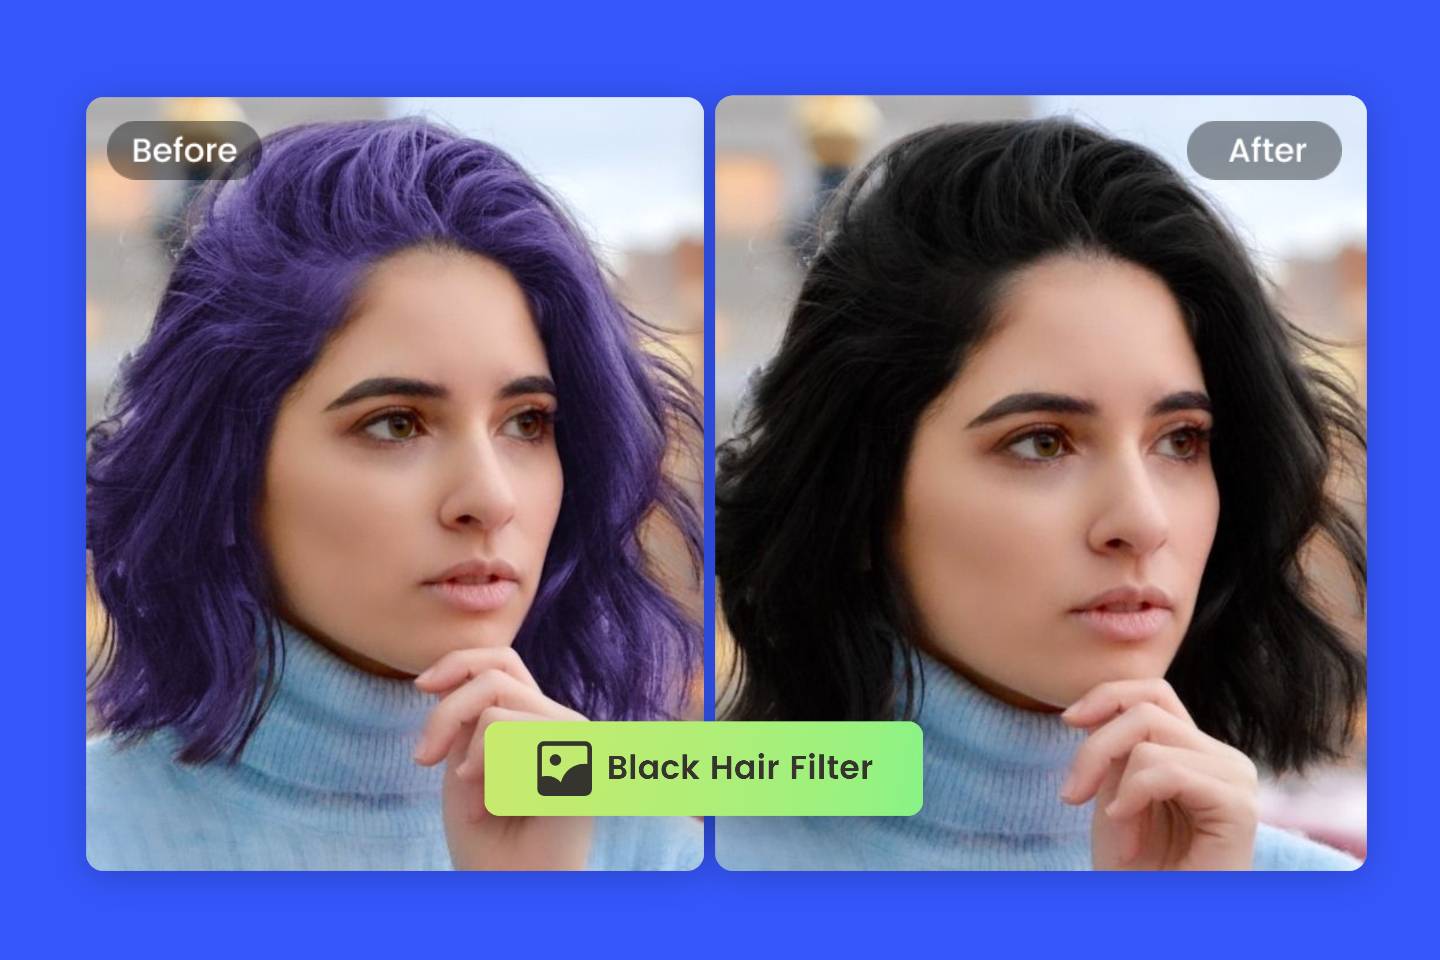 Turn your hair from purple to black with Fotor black hair filter